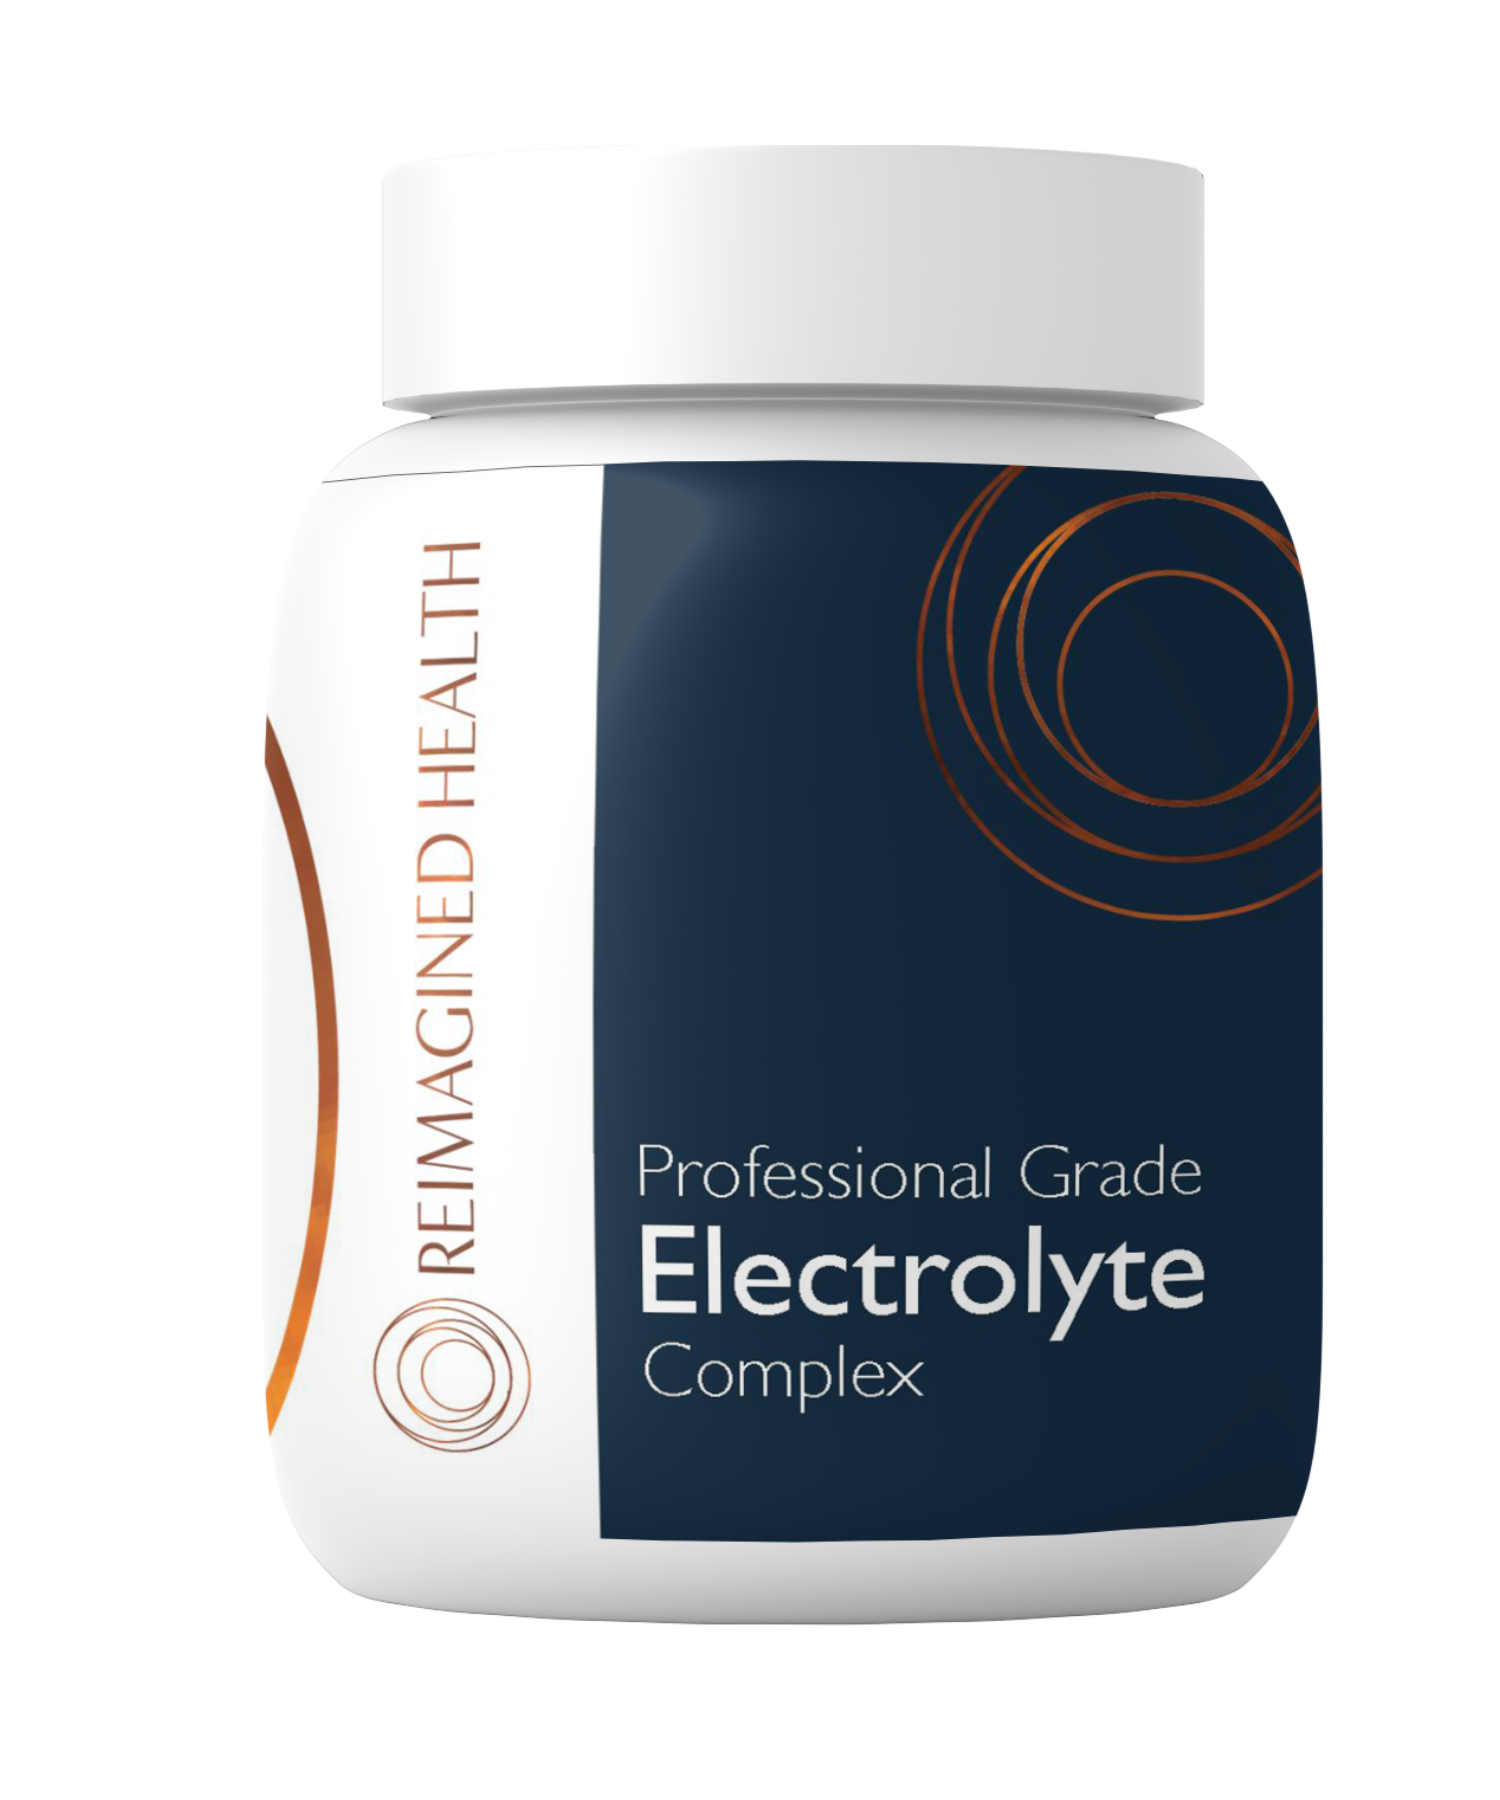 Professional-Grade-Electrolyte-Complex-A343-1.png